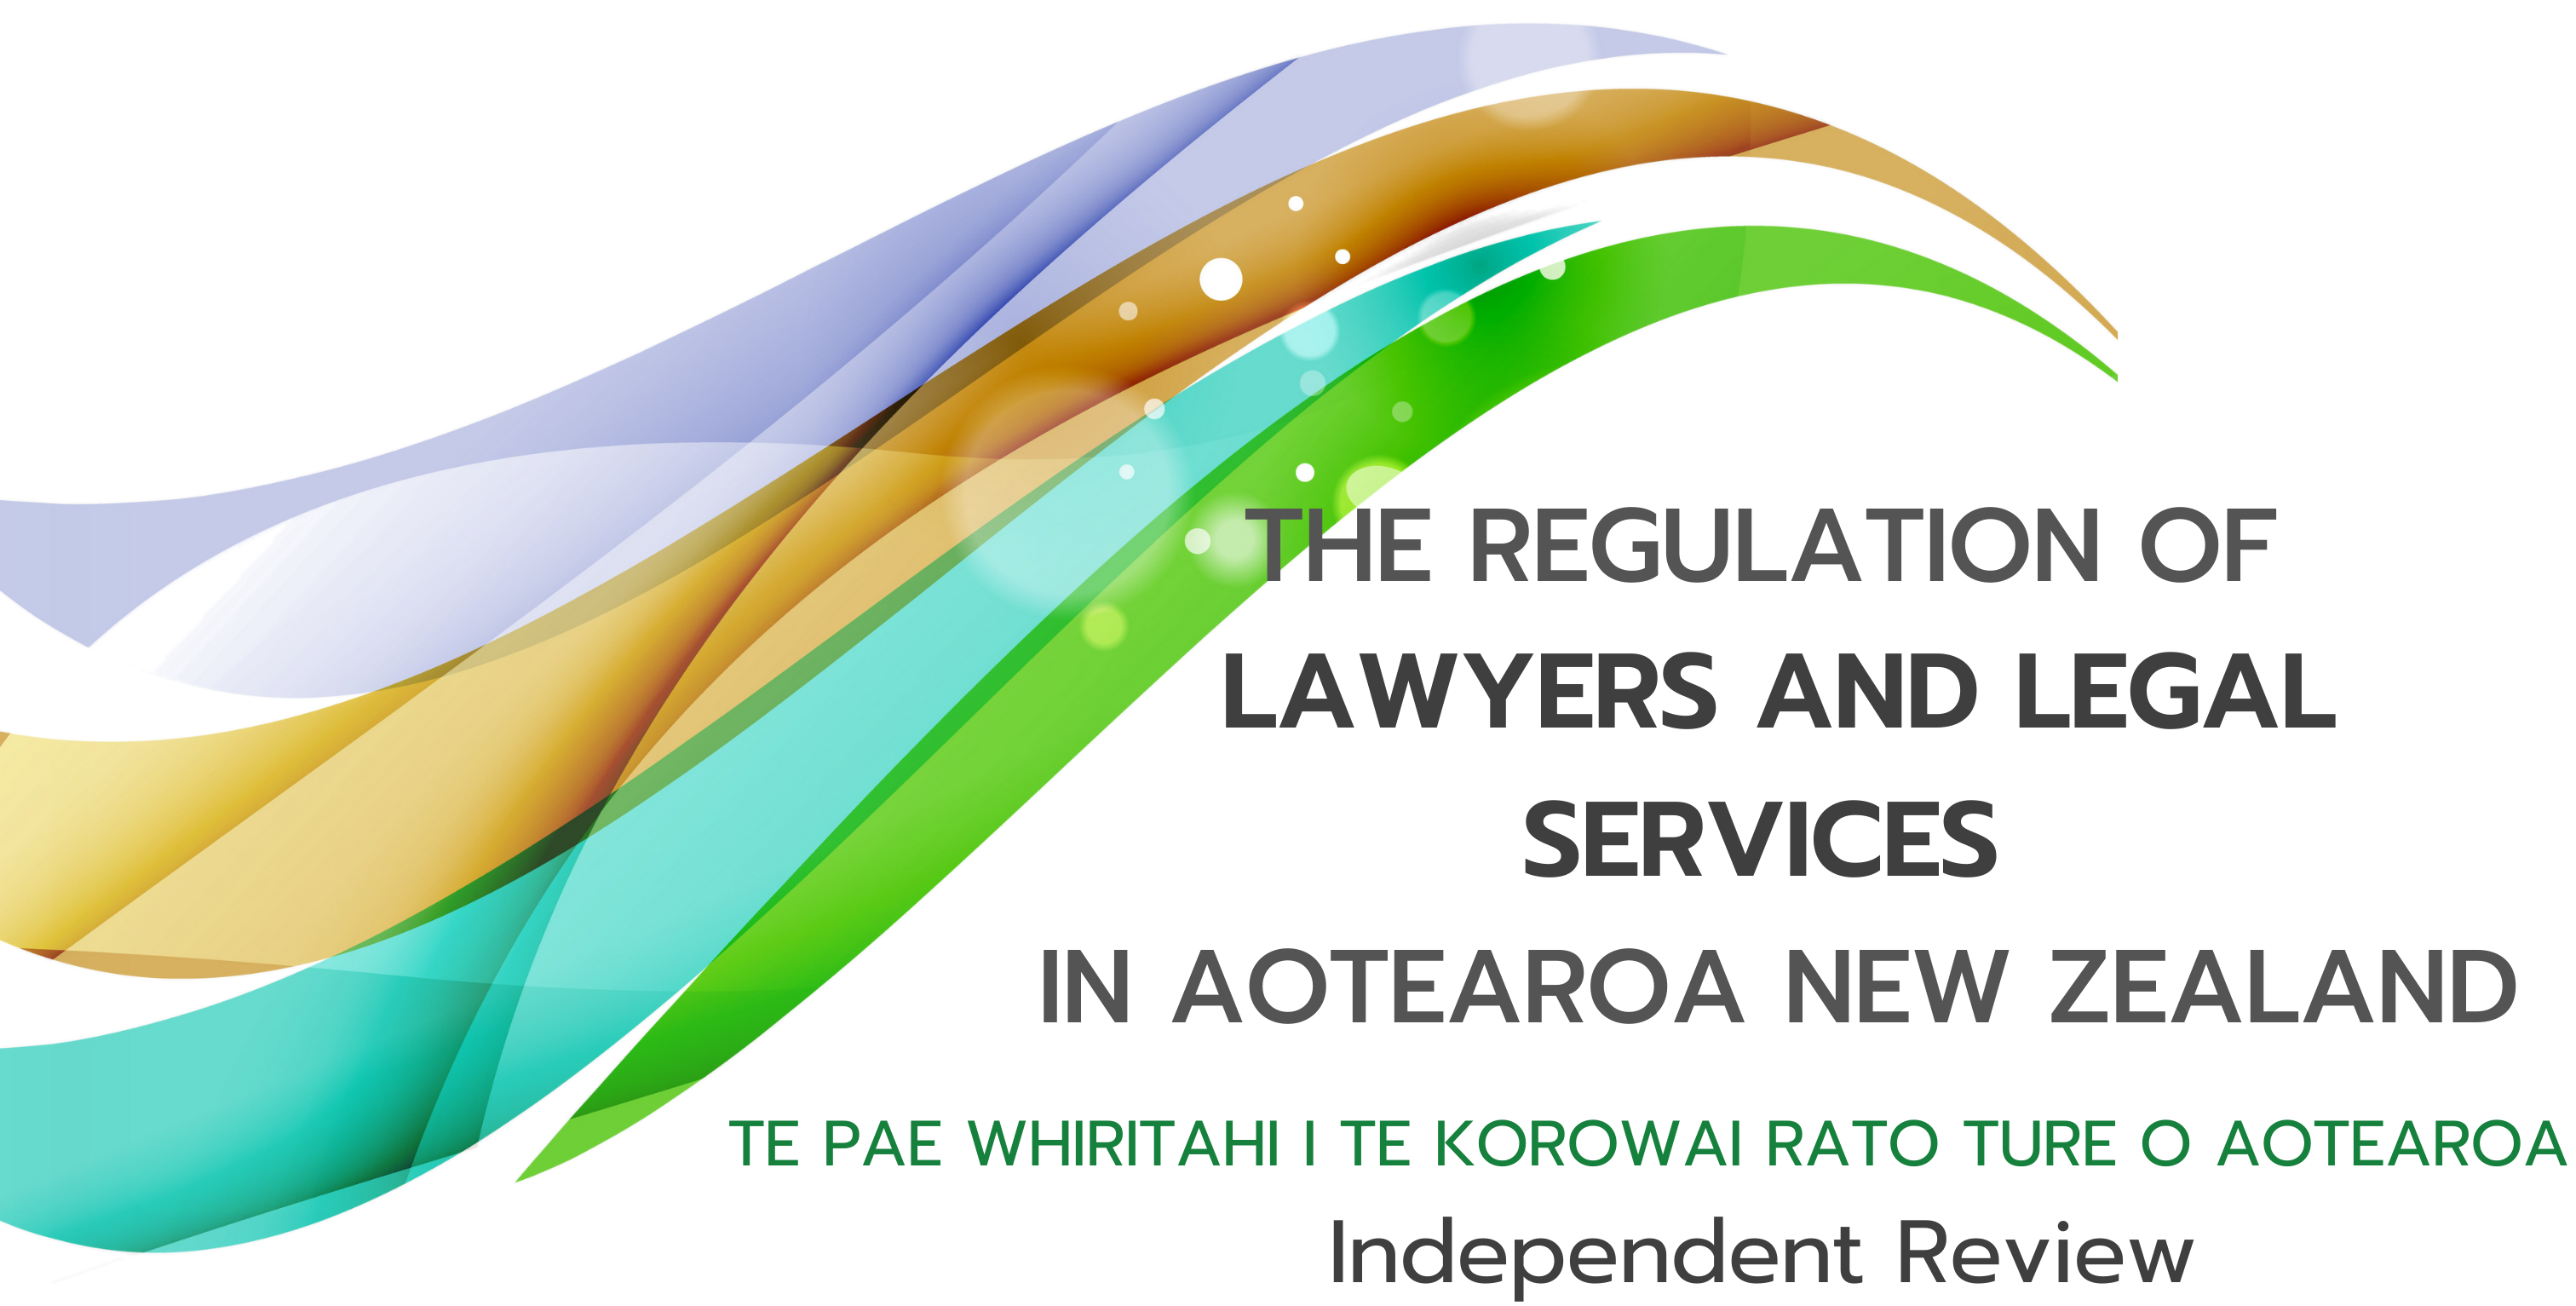 The regulation of lawyers and legal services in Aotearoa New Zealand